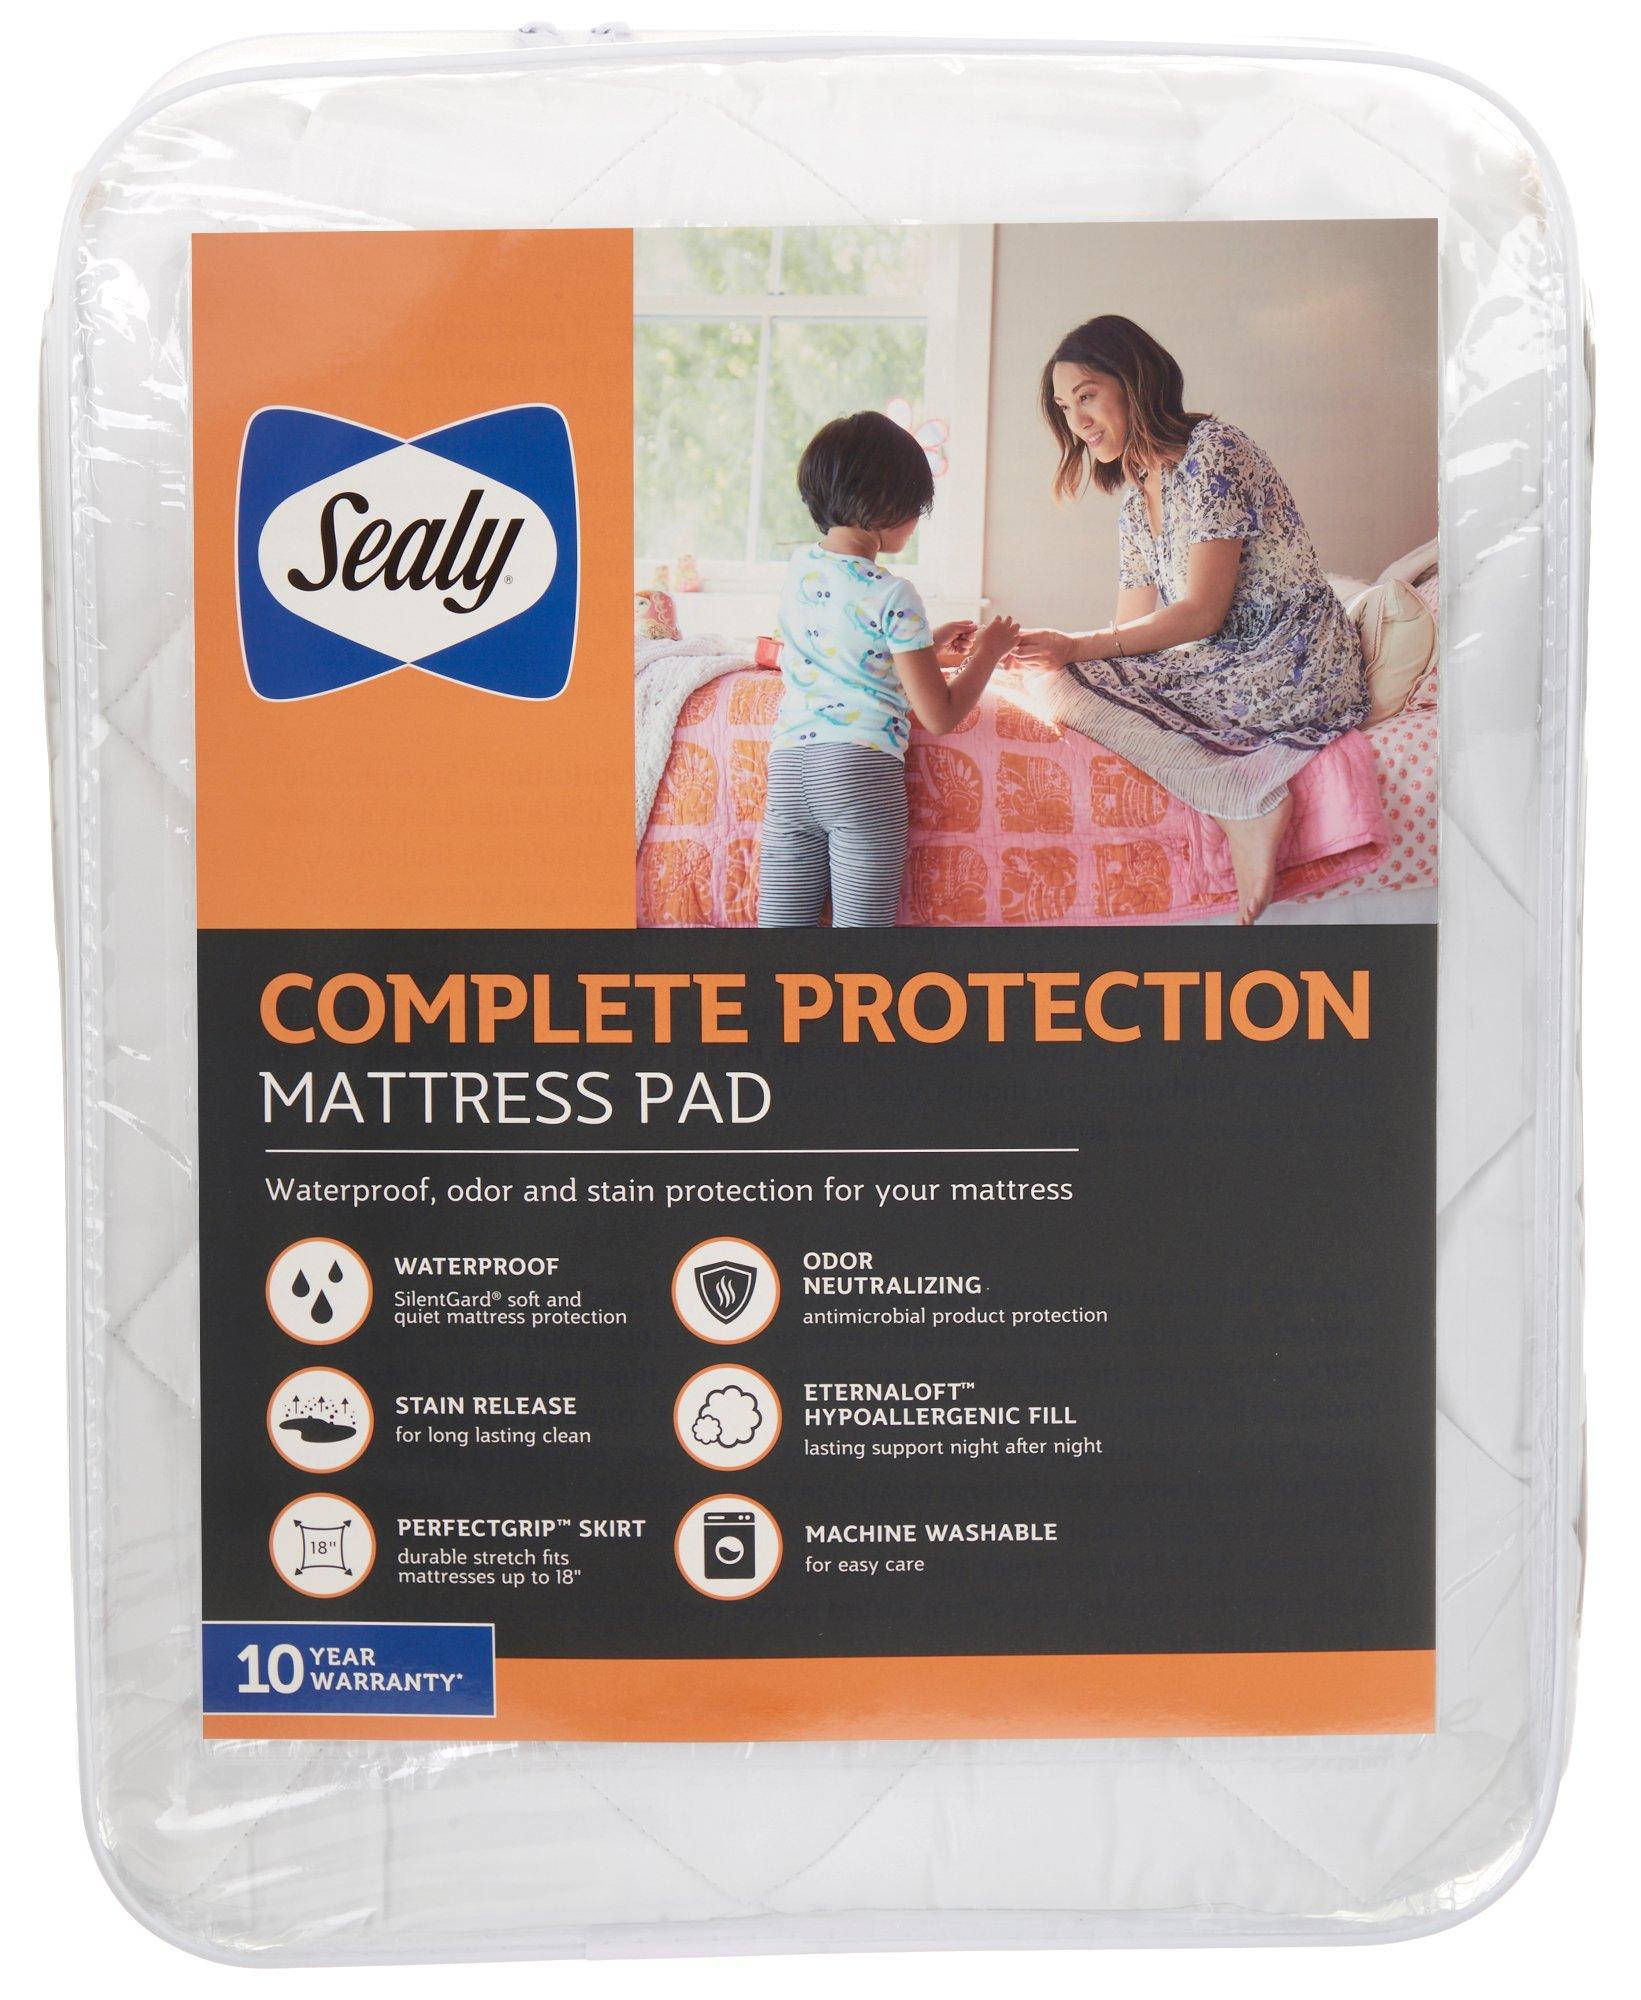 Complete Protection Mattress Pad